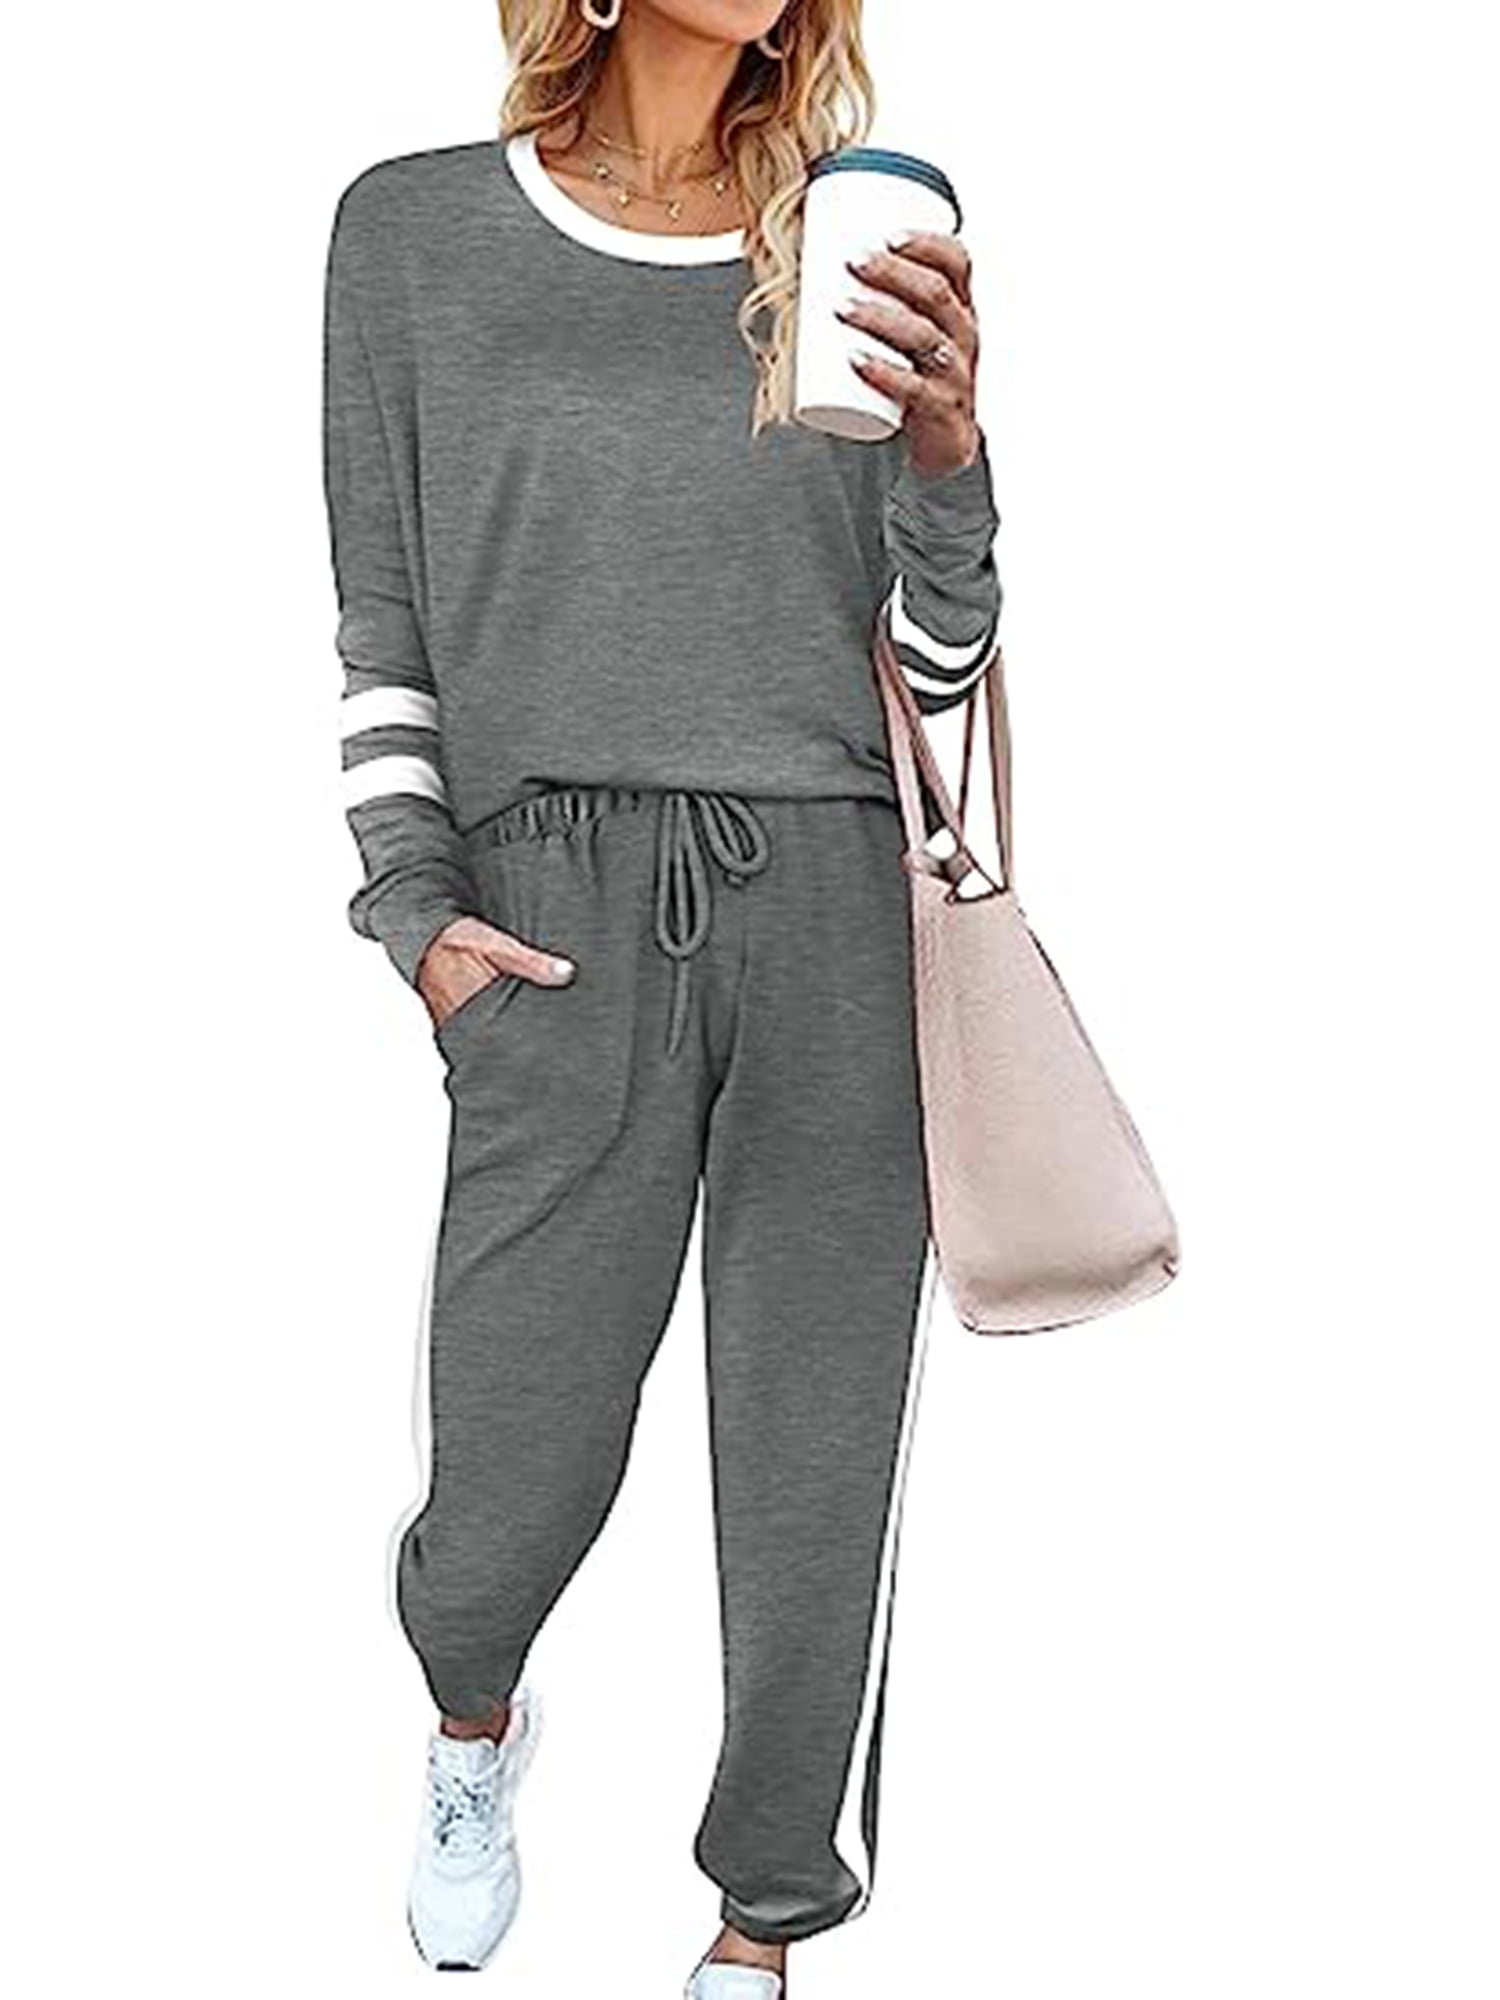 UVN Tracksuits for Women Casual Sweatsuit 2 Piece Sets Striped ...